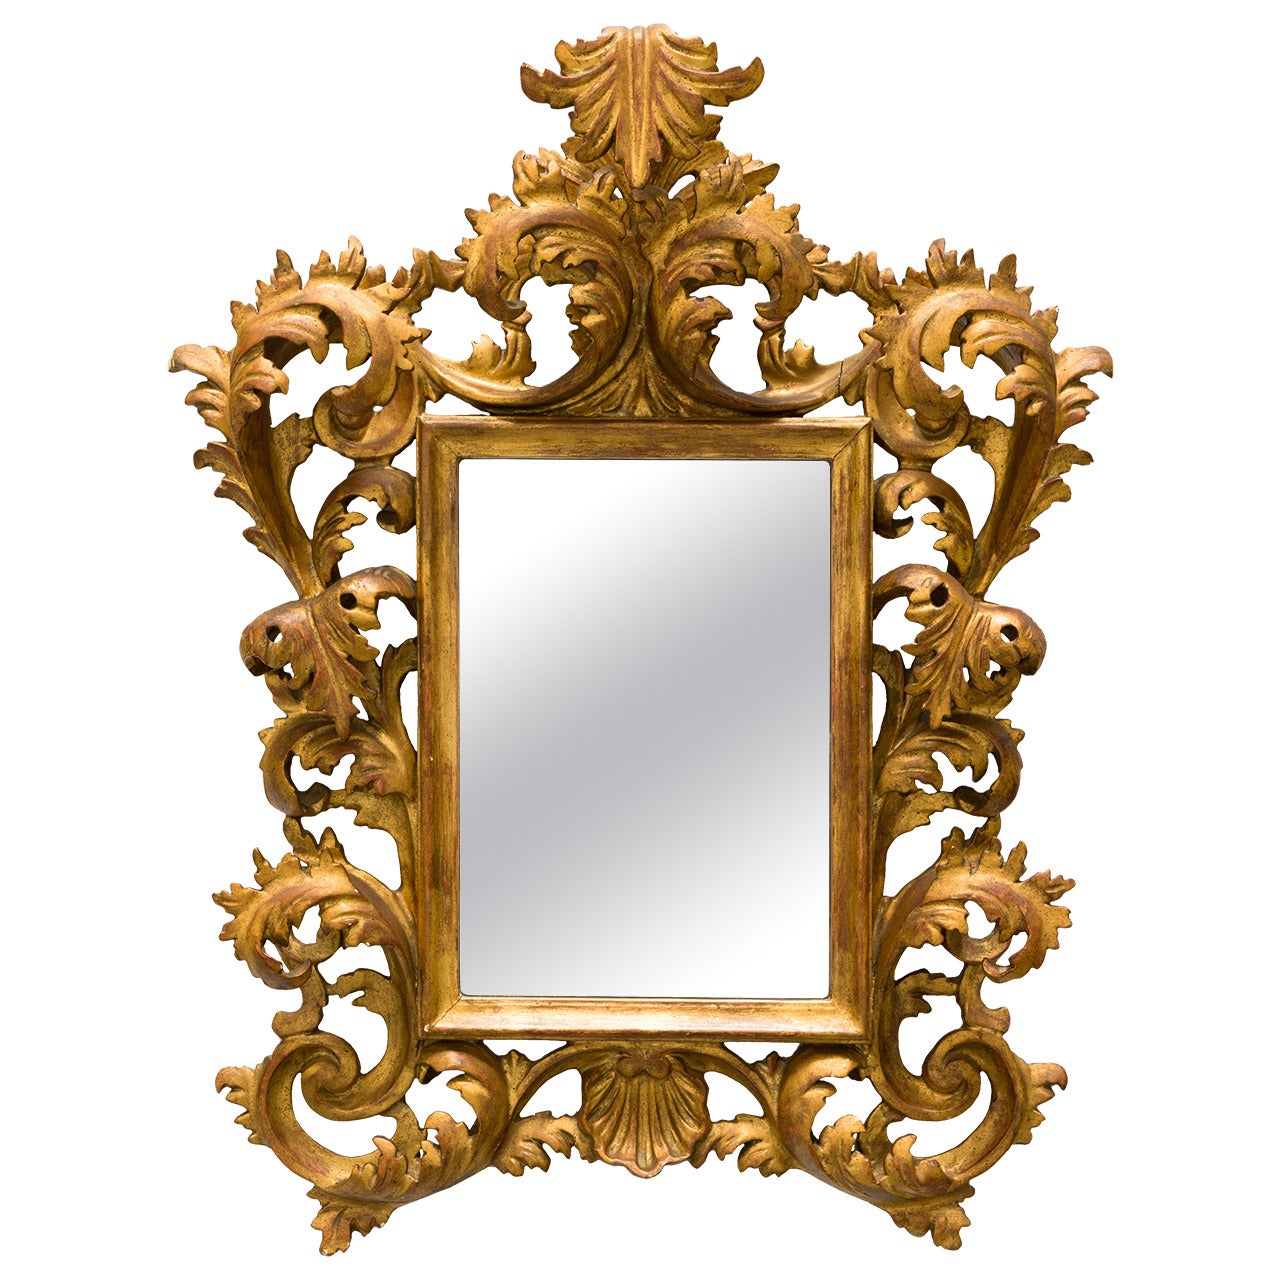 French Giltwood Rococo Style Wall Mirror